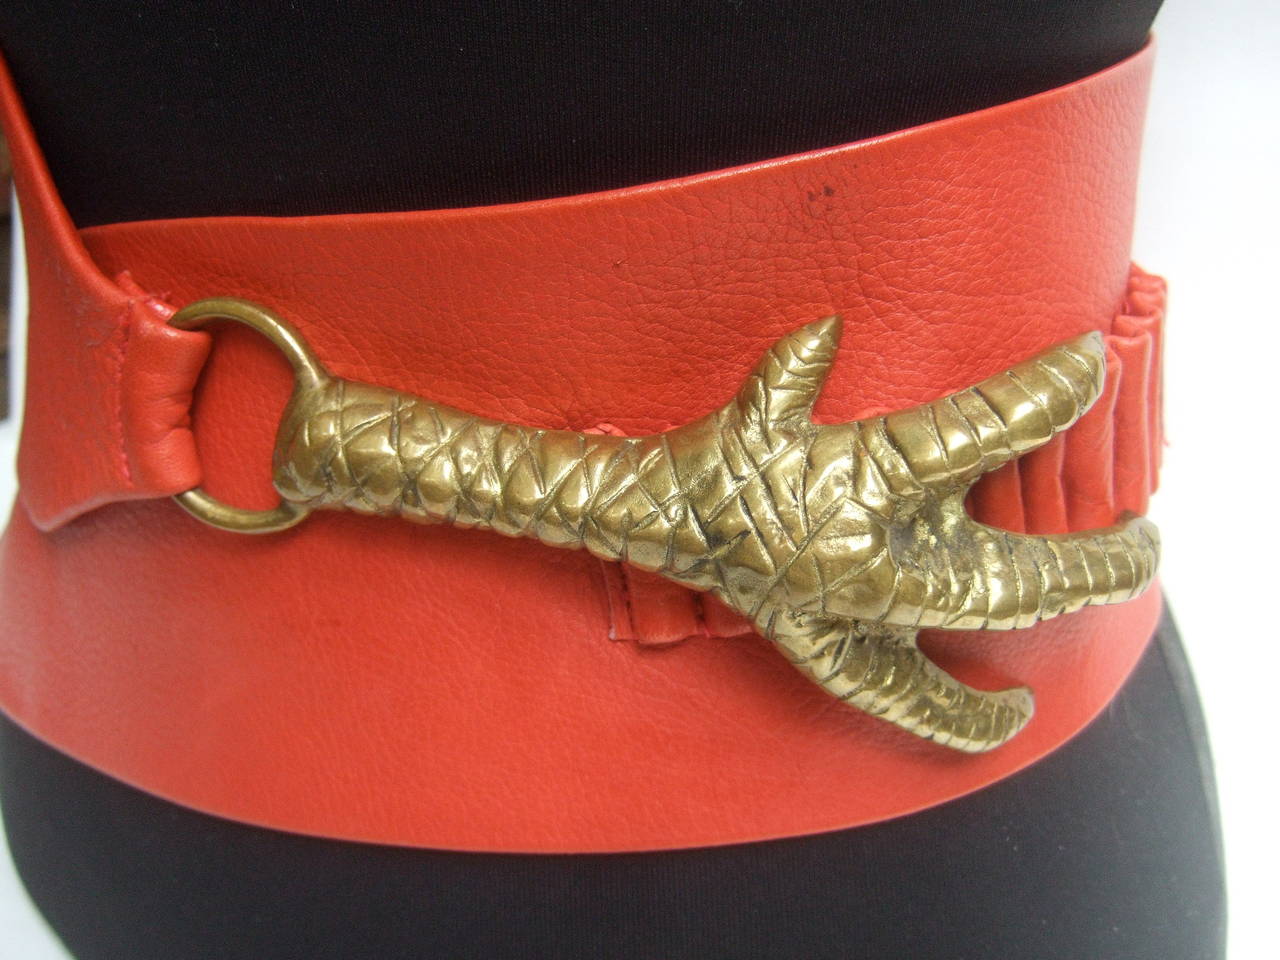 Surrealistic scarlet red leather brass claw belt designed by
Georges Mailian Paris

The spectacular avant-garde belt is adorned with a huge brass 
metal claw. The ornate brass metal claw buckle is substantial in 
weight. The wide supple red